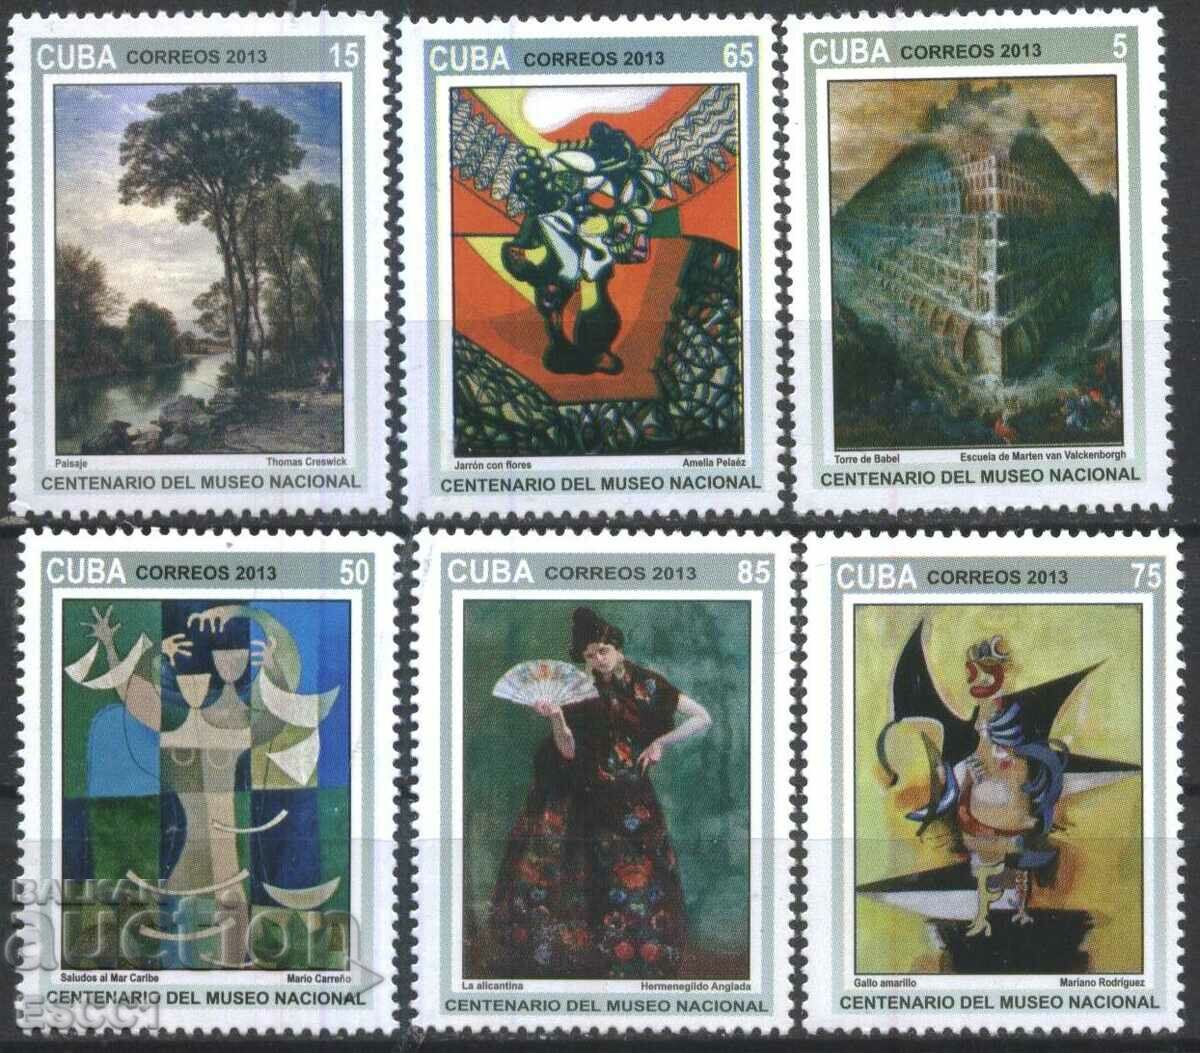 2013 National Museum 100th Anniversary Stamps from Cuba